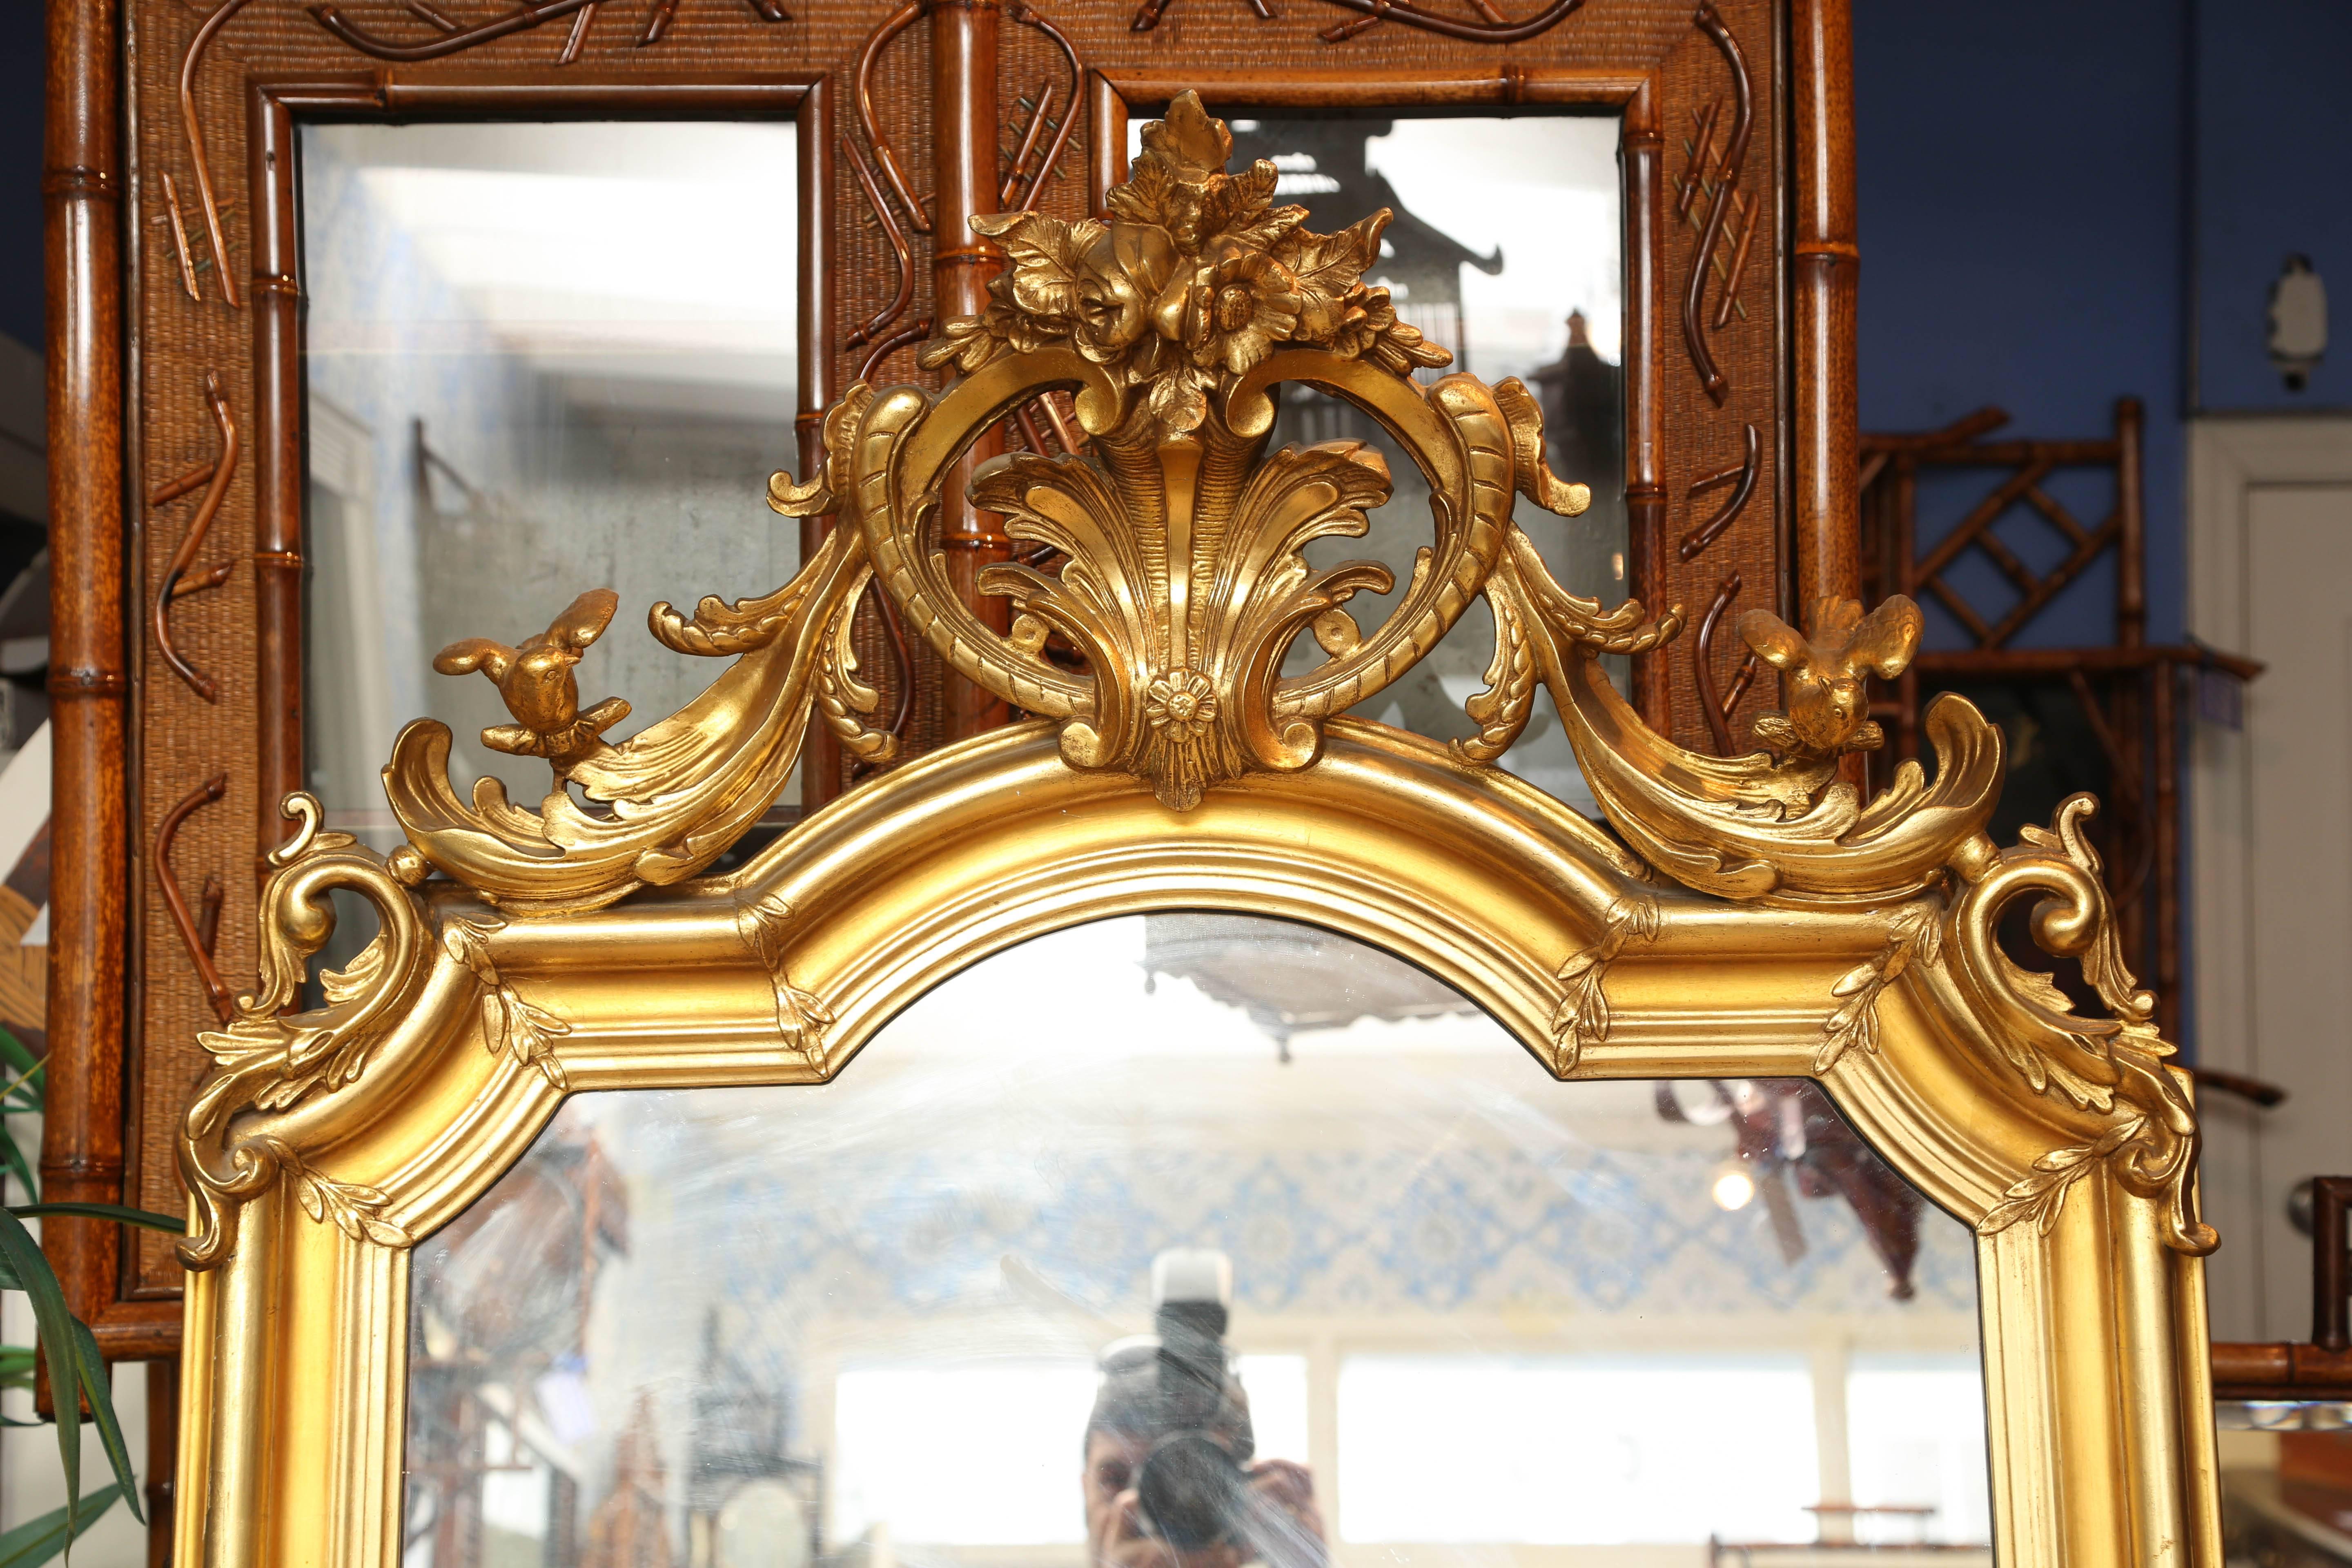 This is a superb quality gilt French antique freestanding or wall mirror.
The gilt work is all original and in excellent condition.
There are carved birds to either side at the top.
With Rocco style carving to the center.
Measurements are 78